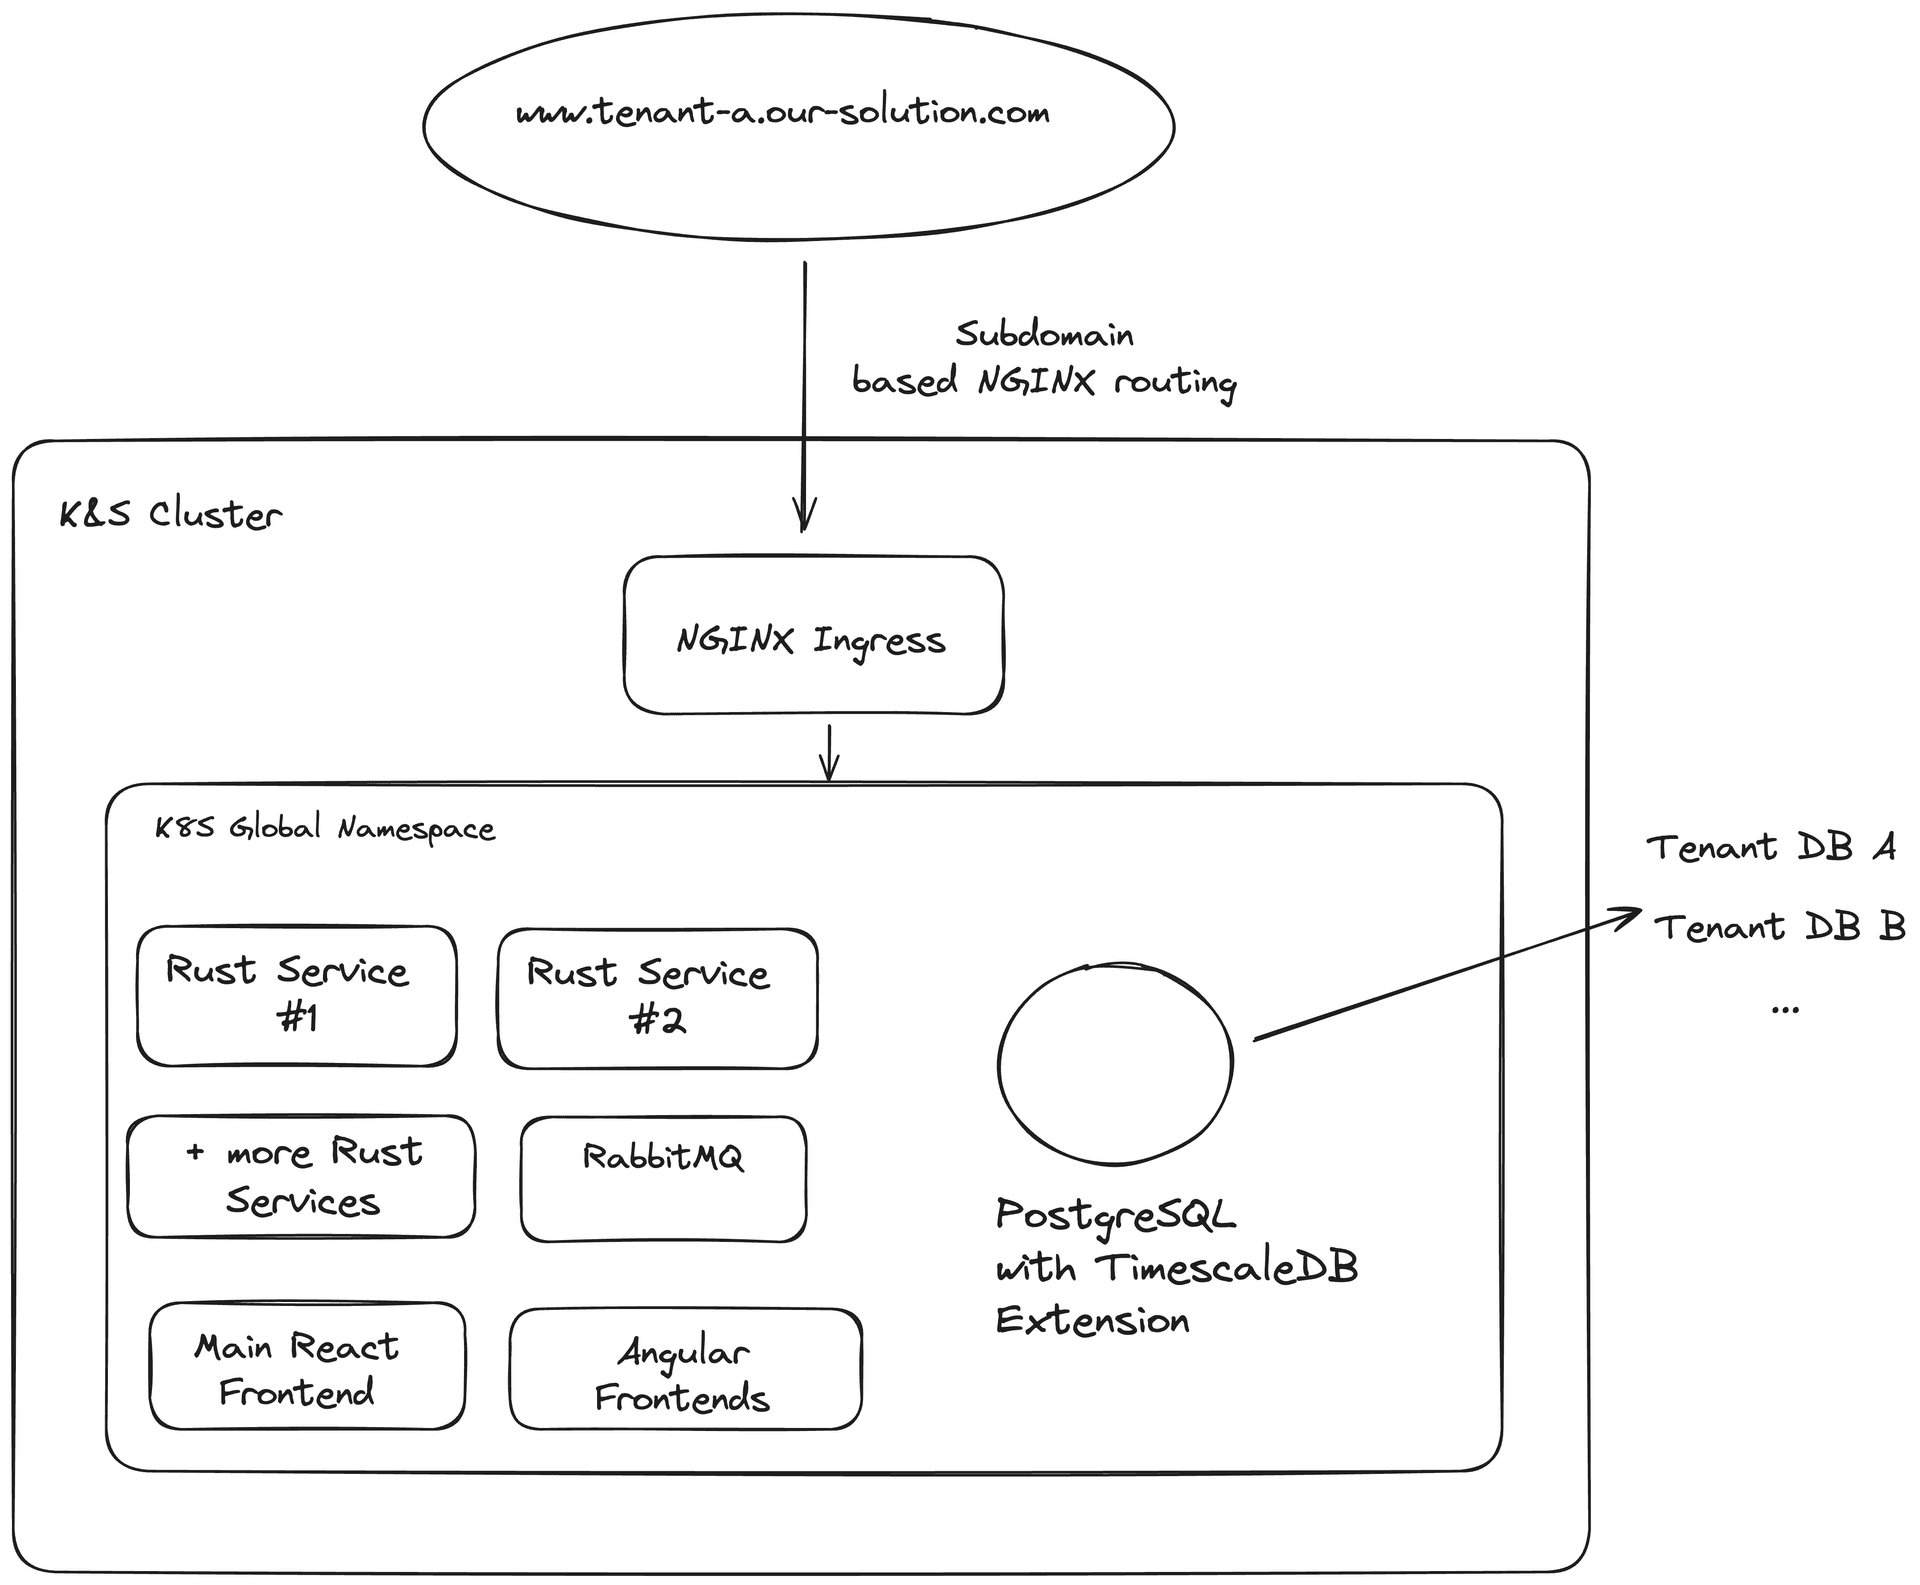 A diagram of our infrastructure after migrating to the new K8S architecture.